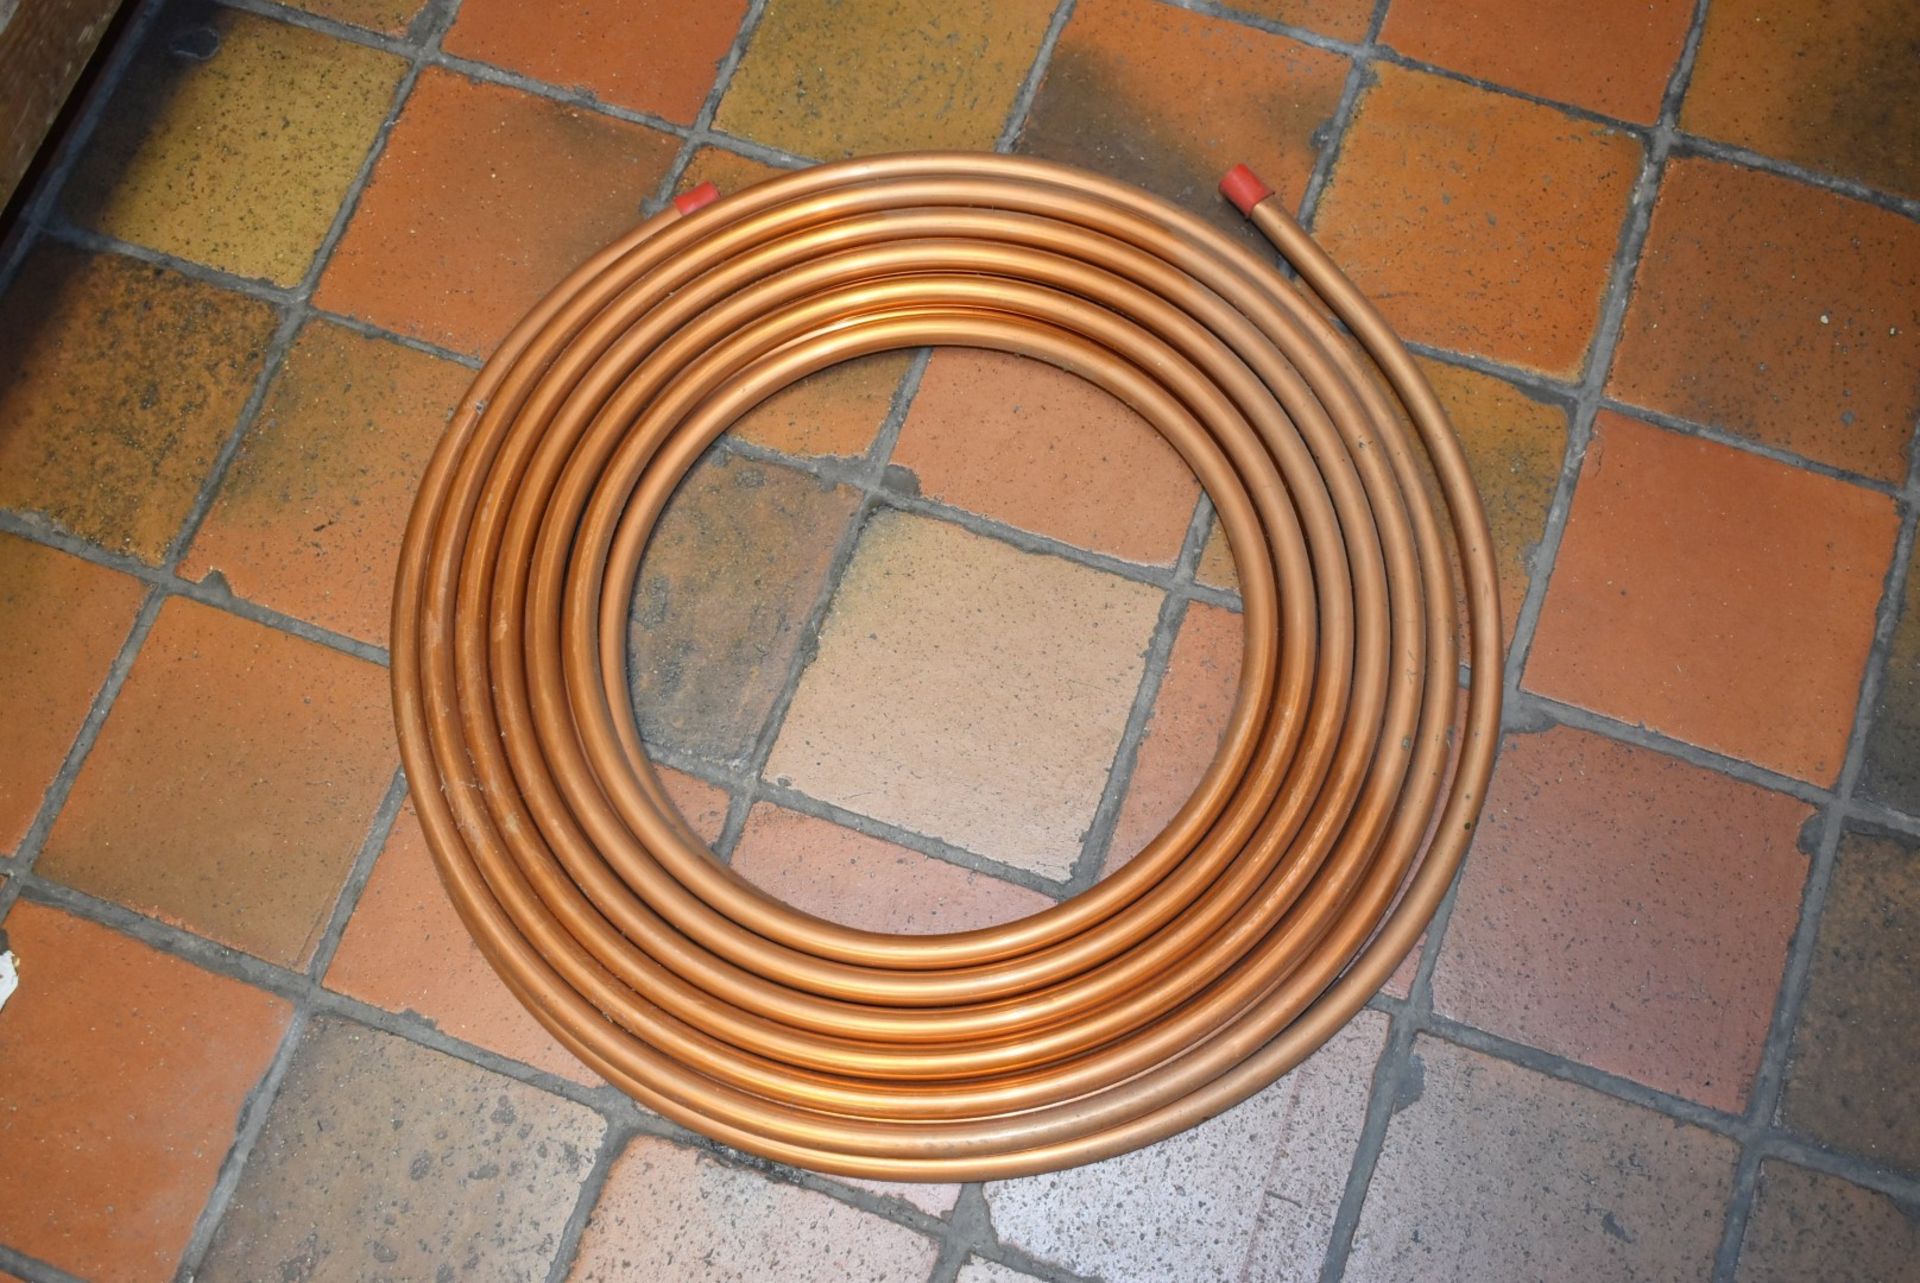 1 x Reel of Unused Copper Tubing - Approx Diameter 20 Inches - Image 2 of 4